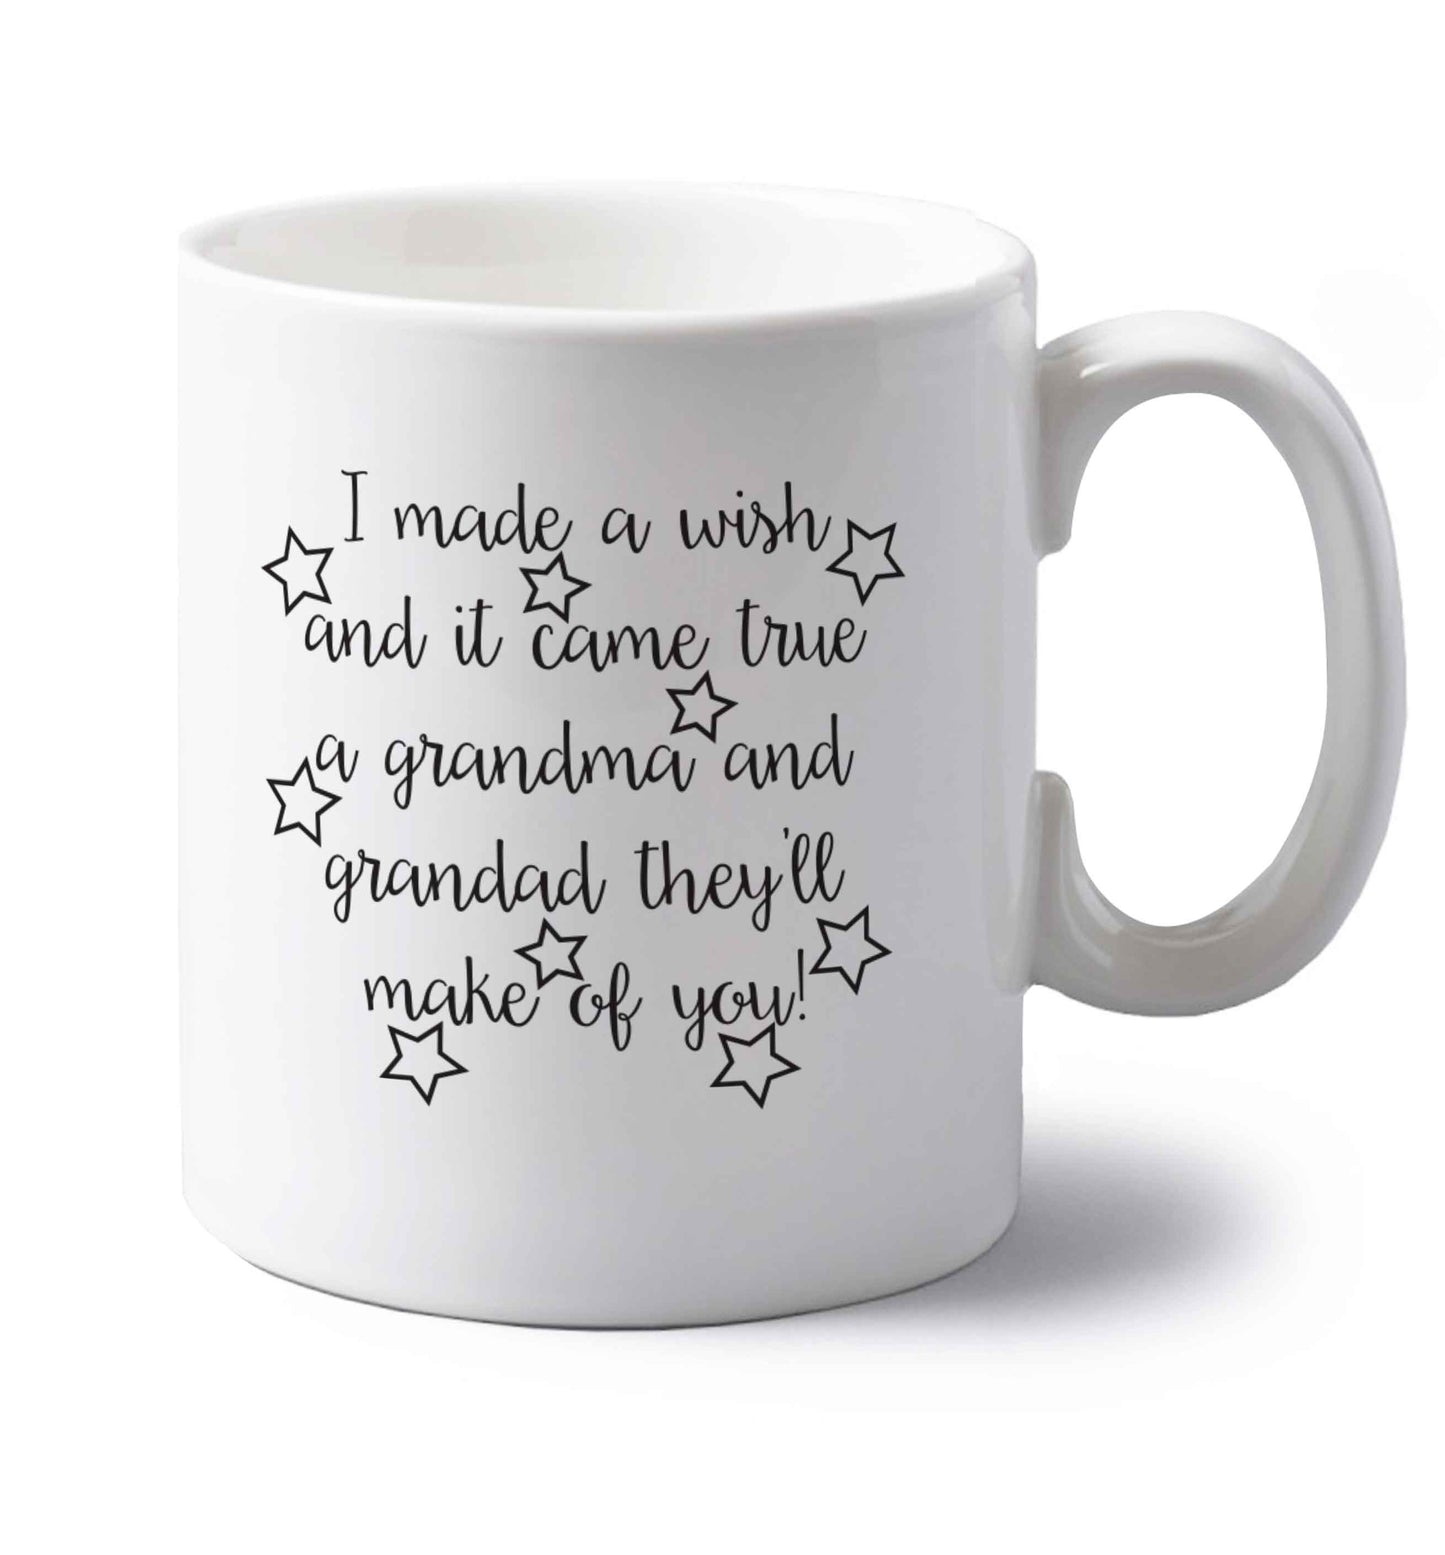 I made a wish and it came true a grandma and grandad they'll make of you! left handed white ceramic mug 